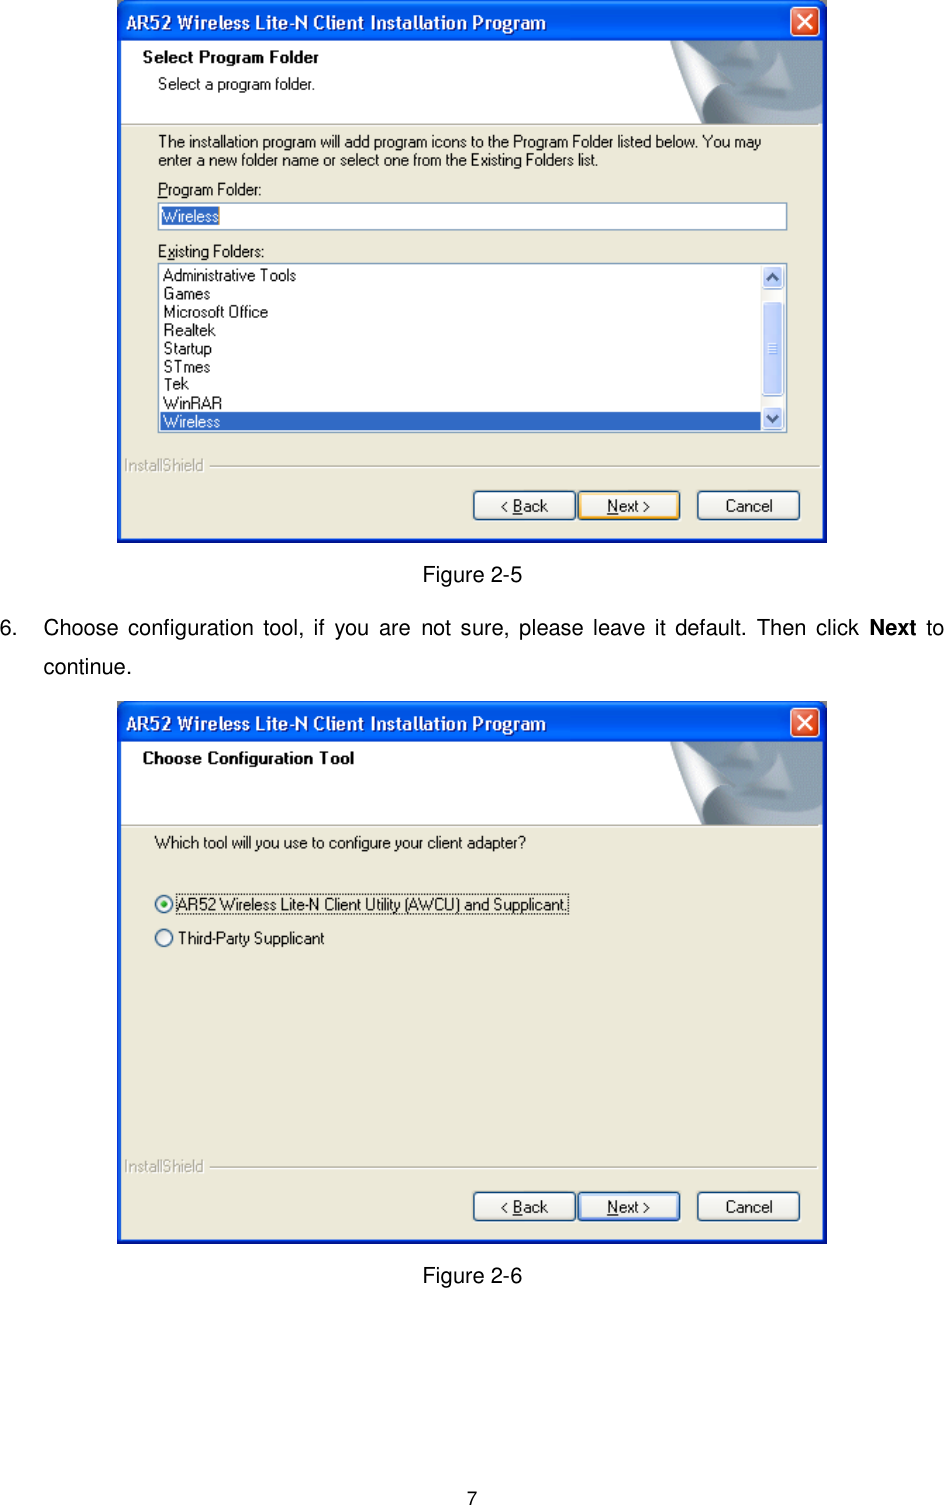  7  Figure 2-5 6.  Choose  configuration tool,  if  you are  not sure, please leave it default.  Then  click  Next  to continue.  Figure 2-6 